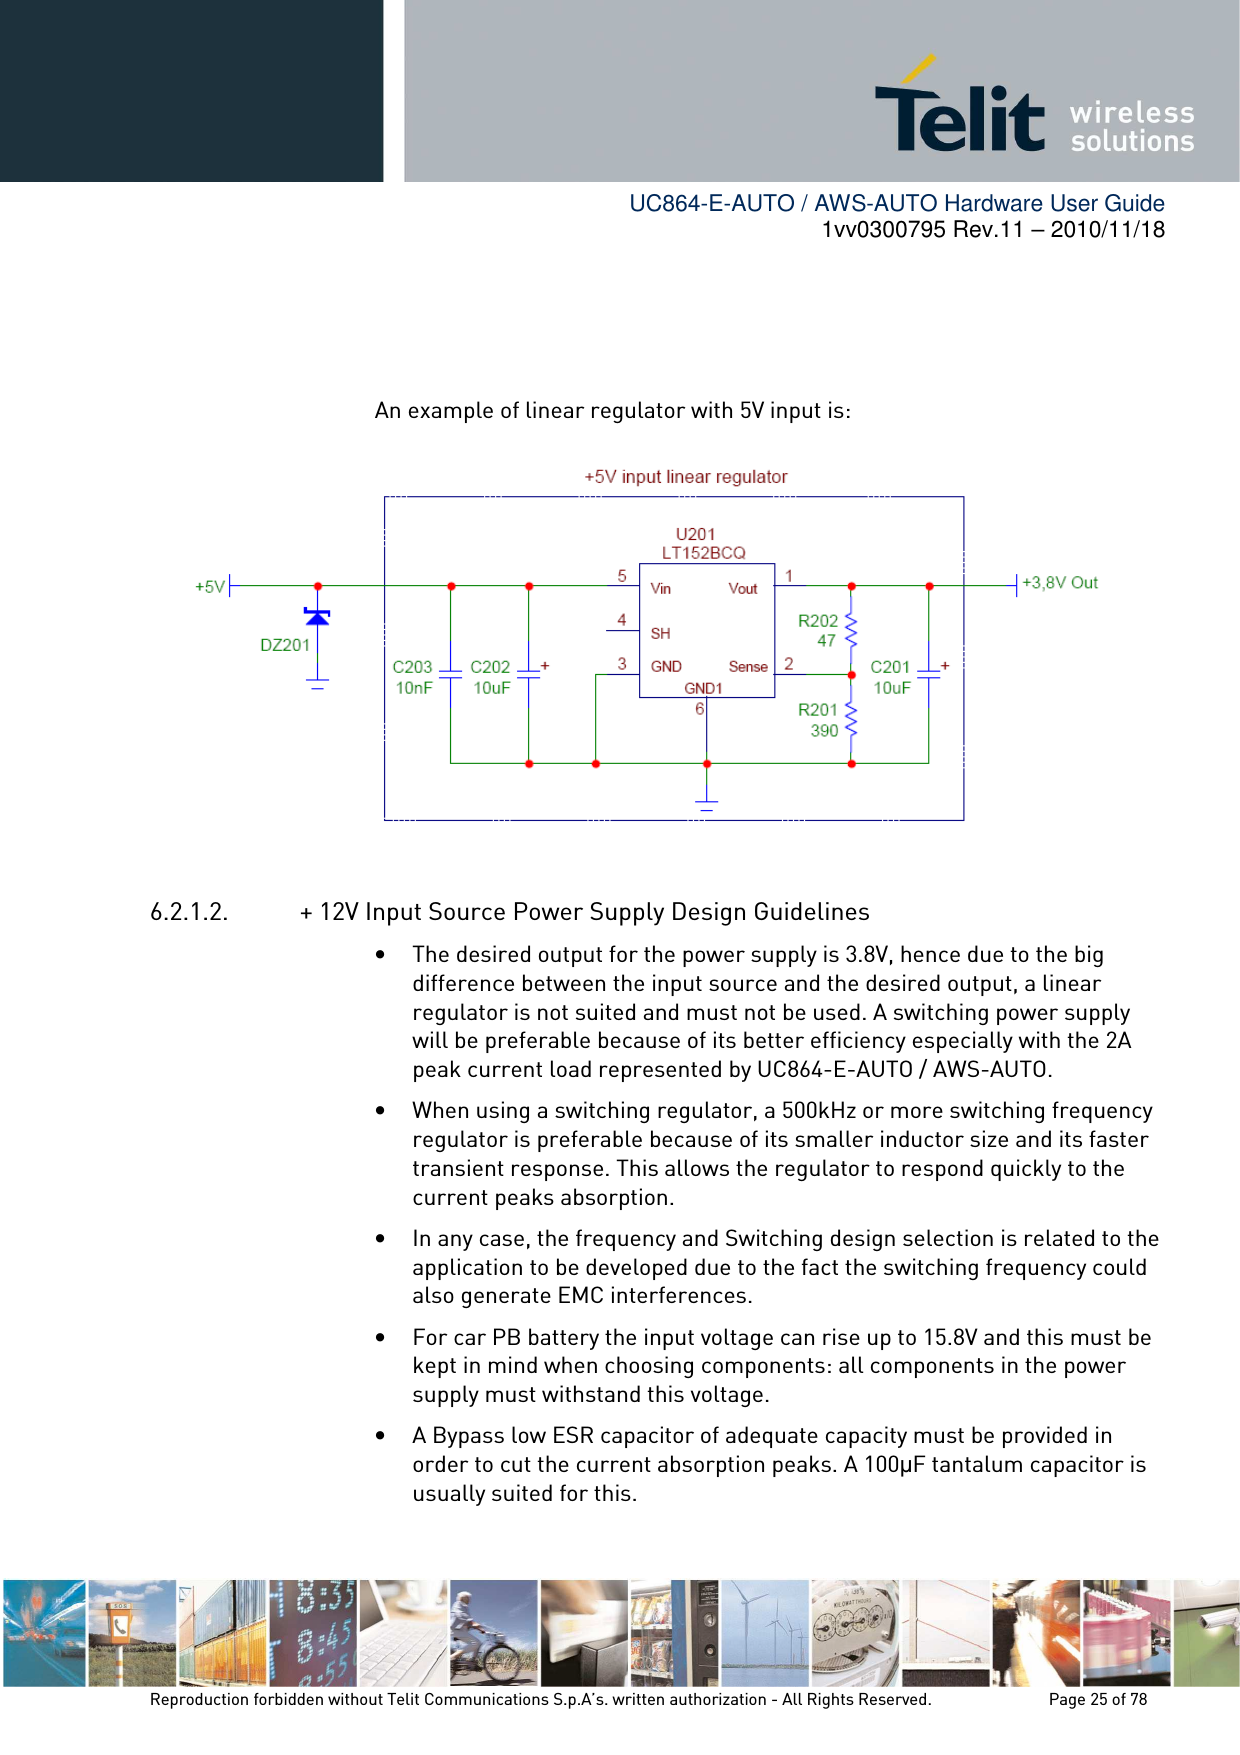        UC864-E-AUTO / AWS-AUTO Hardware User Guide 1vv0300795 Rev.11 – 2010/11/18     Reproduction forbidden without Telit Communications S.p.A’s. written authorization - All Rights Reserved.    Page 25 of 78     An example of linear regulator with 5V input is:  6.2.1.2. + 12V Input Source Power Supply Design Guidelines • The desired output for the power supply is 3.8V, hence due to the big difference between the input source and the desired output, a linear regulator is not suited and must not be used. A switching power supply will be preferable because of its better efficiency especially with the 2A peak current load represented by UC864-E-AUTO / AWS-AUTO. • When using a switching regulator, a 500kHz or more switching frequency regulator is preferable because of its smaller inductor size and its faster transient response. This allows the regulator to respond quickly to the current peaks absorption.  • In any case, the frequency and Switching design selection is related to the application to be developed due to the fact the switching frequency could also generate EMC interferences. • For car PB battery the input voltage can rise up to 15.8V and this must be kept in mind when choosing components: all components in the power supply must withstand this voltage. • A Bypass low ESR capacitor of adequate capacity must be provided in order to cut the current absorption peaks. A 100µF tantalum capacitor is usually suited for this. 